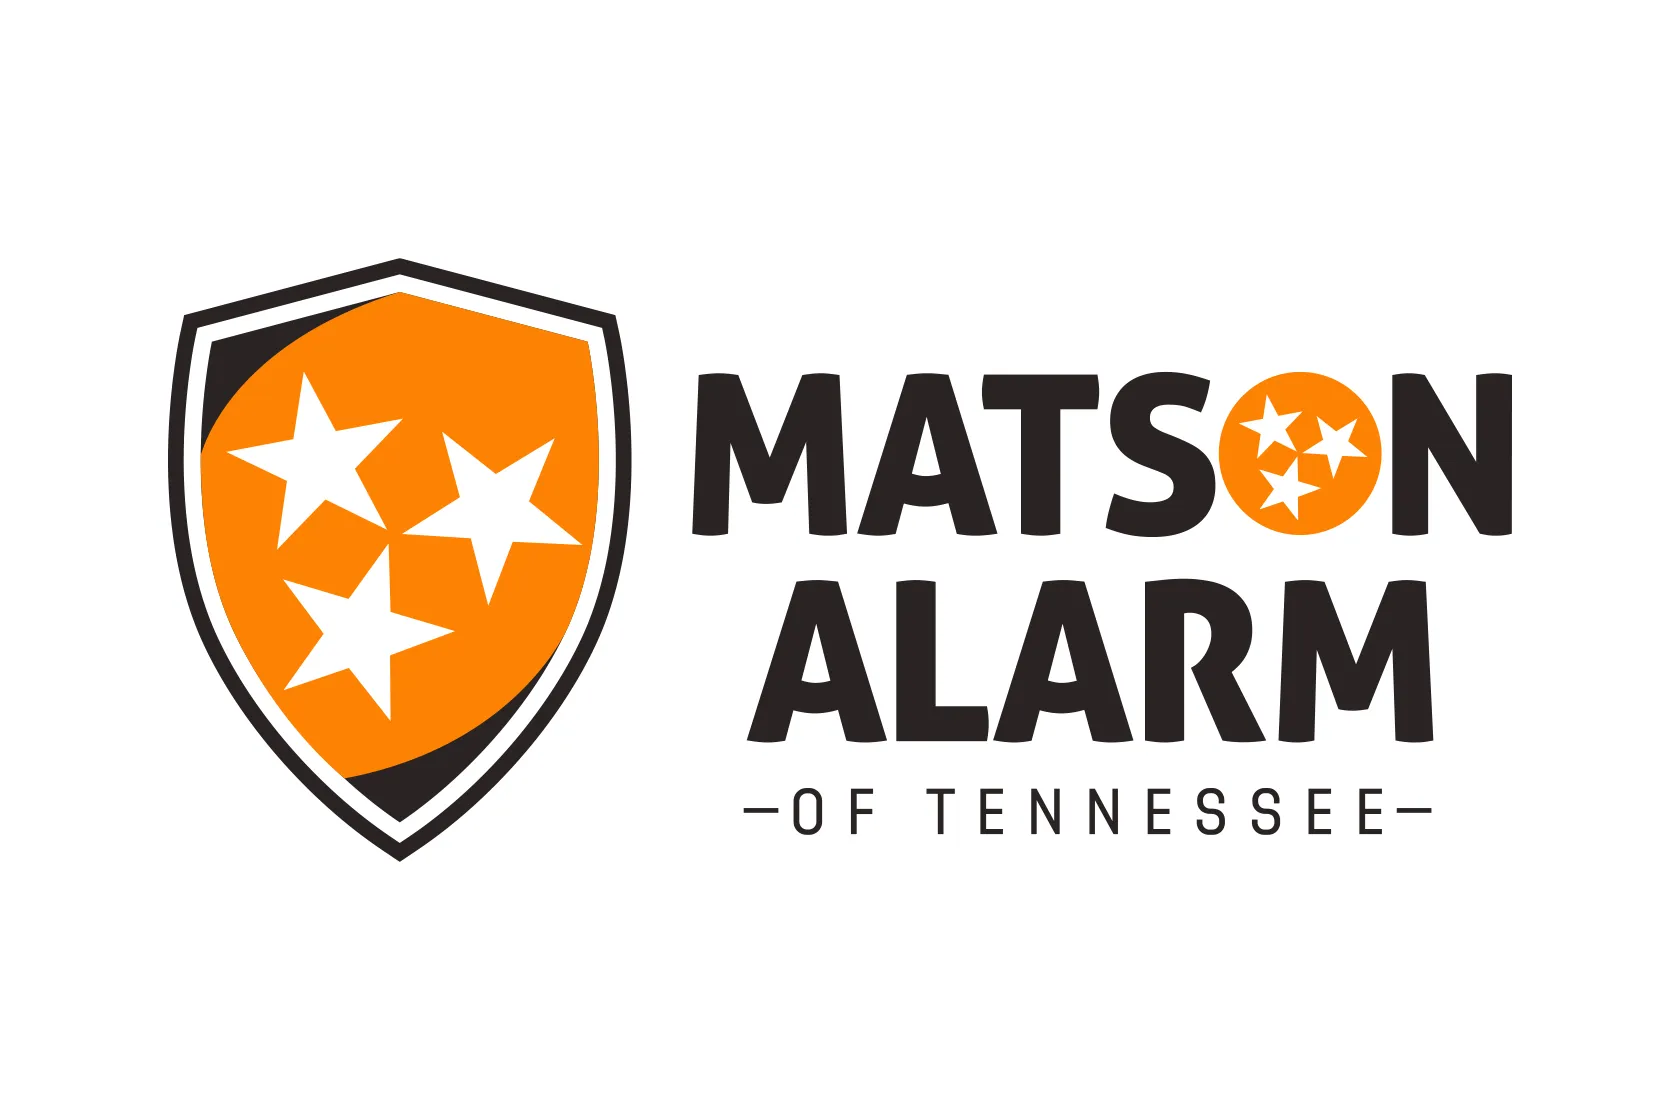 Logo design for Matson Alarm of Tennessee with orange and black shield designed by Christopher Gunn Creative